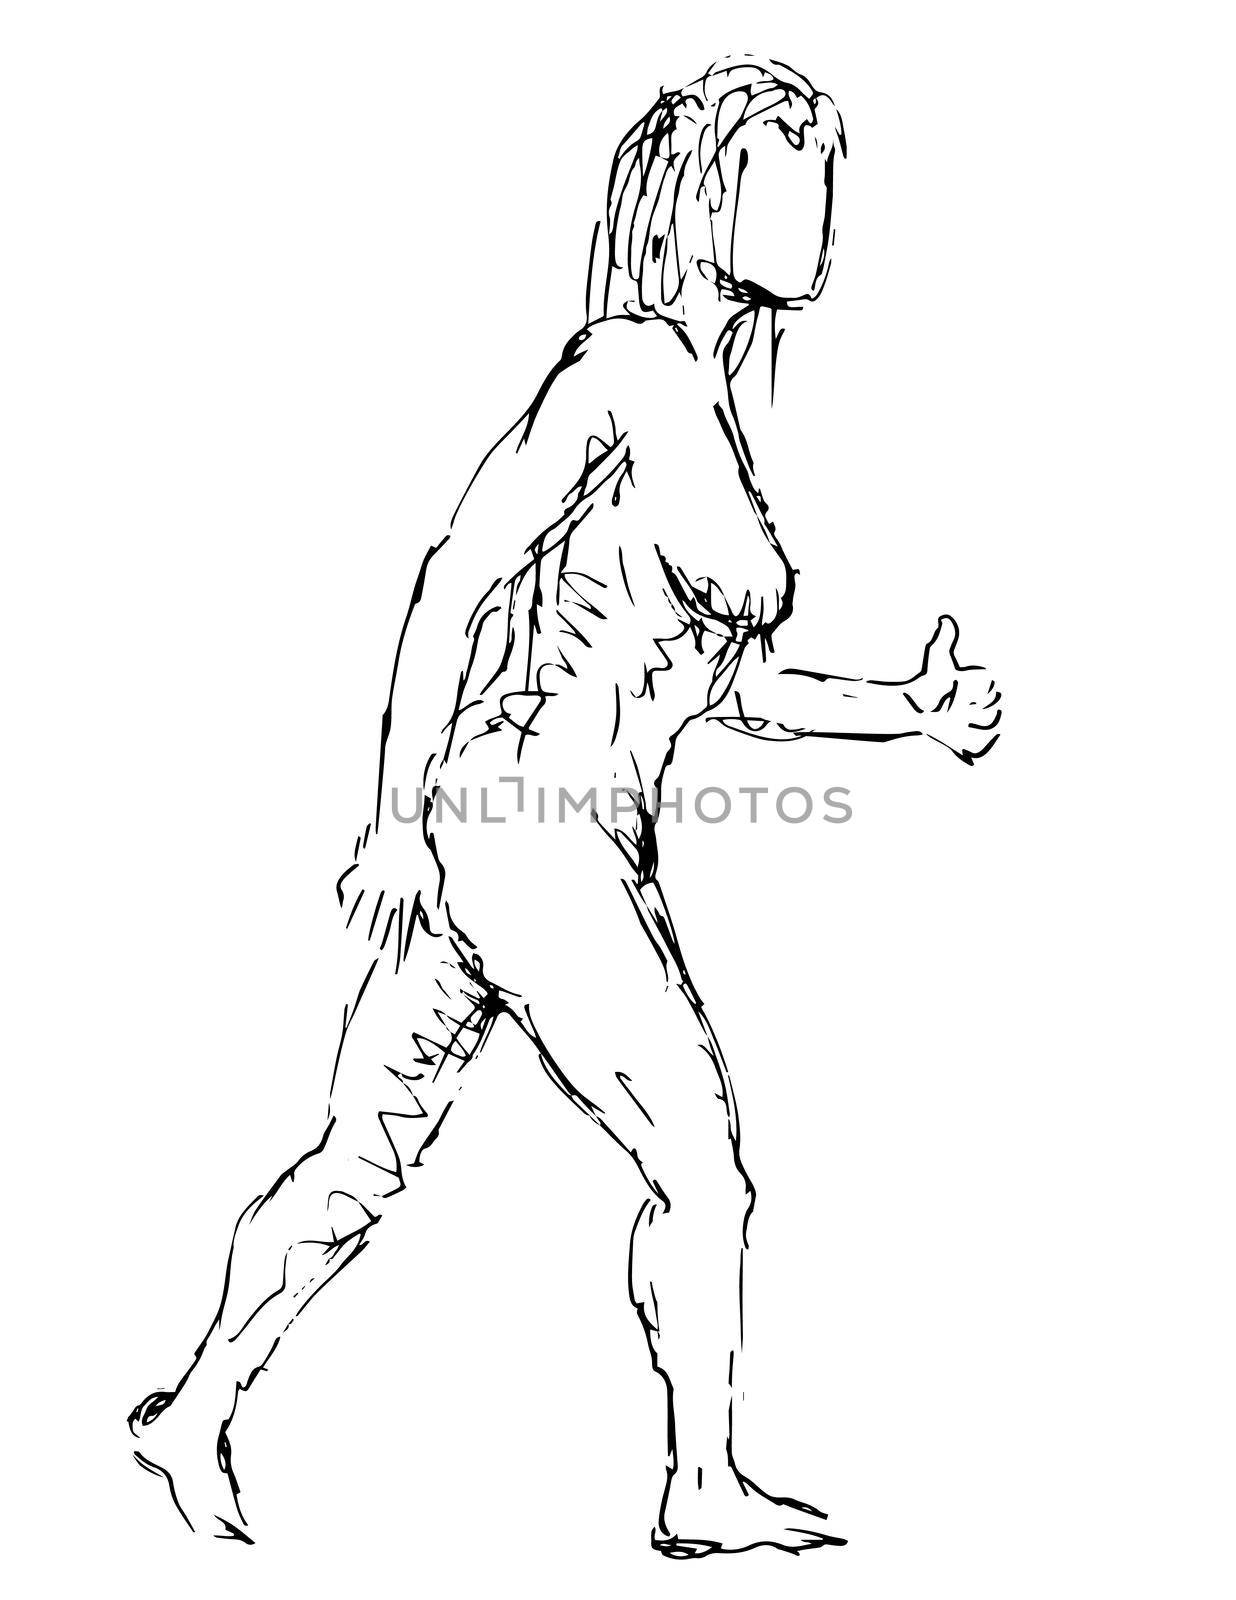 Nude Female Human Figure Striding With Thumb Up Side View Doodle Art Line  by patrimonio